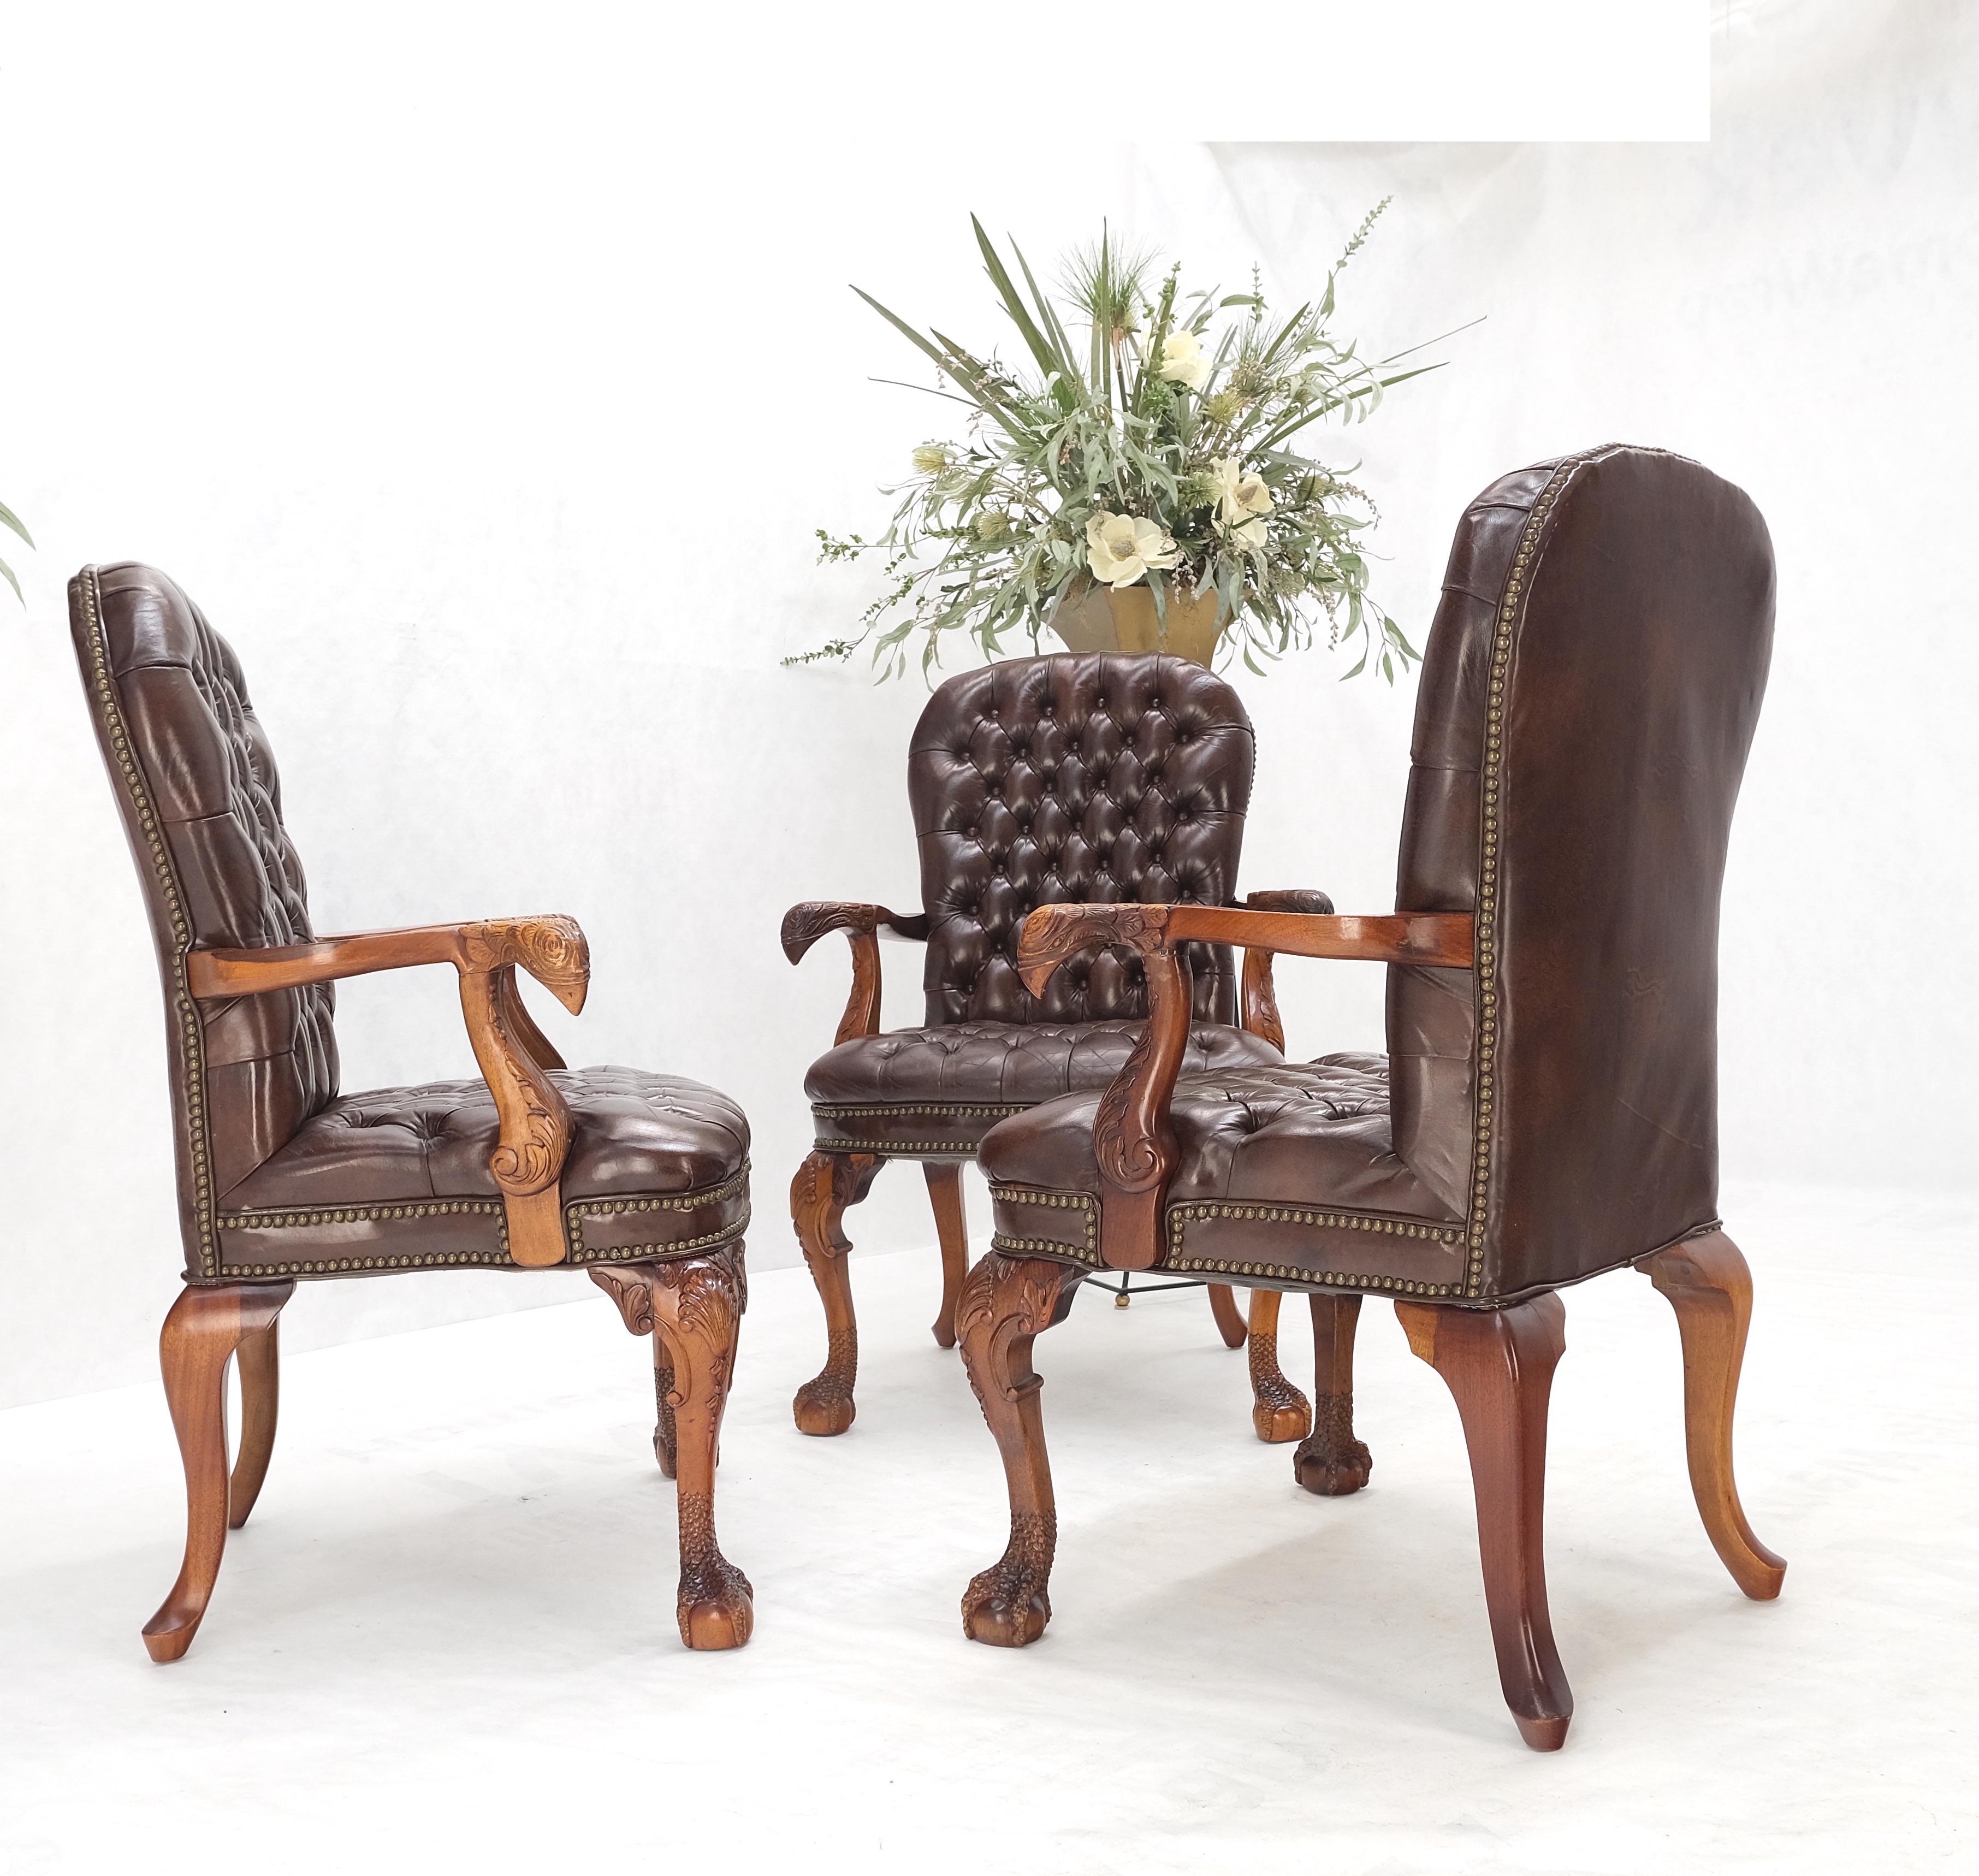 Brown Leather Chesterfield Tufted Backs & Seat Fine Carved Bird Head Walnut Armchairs Fireside Chairs MINT!